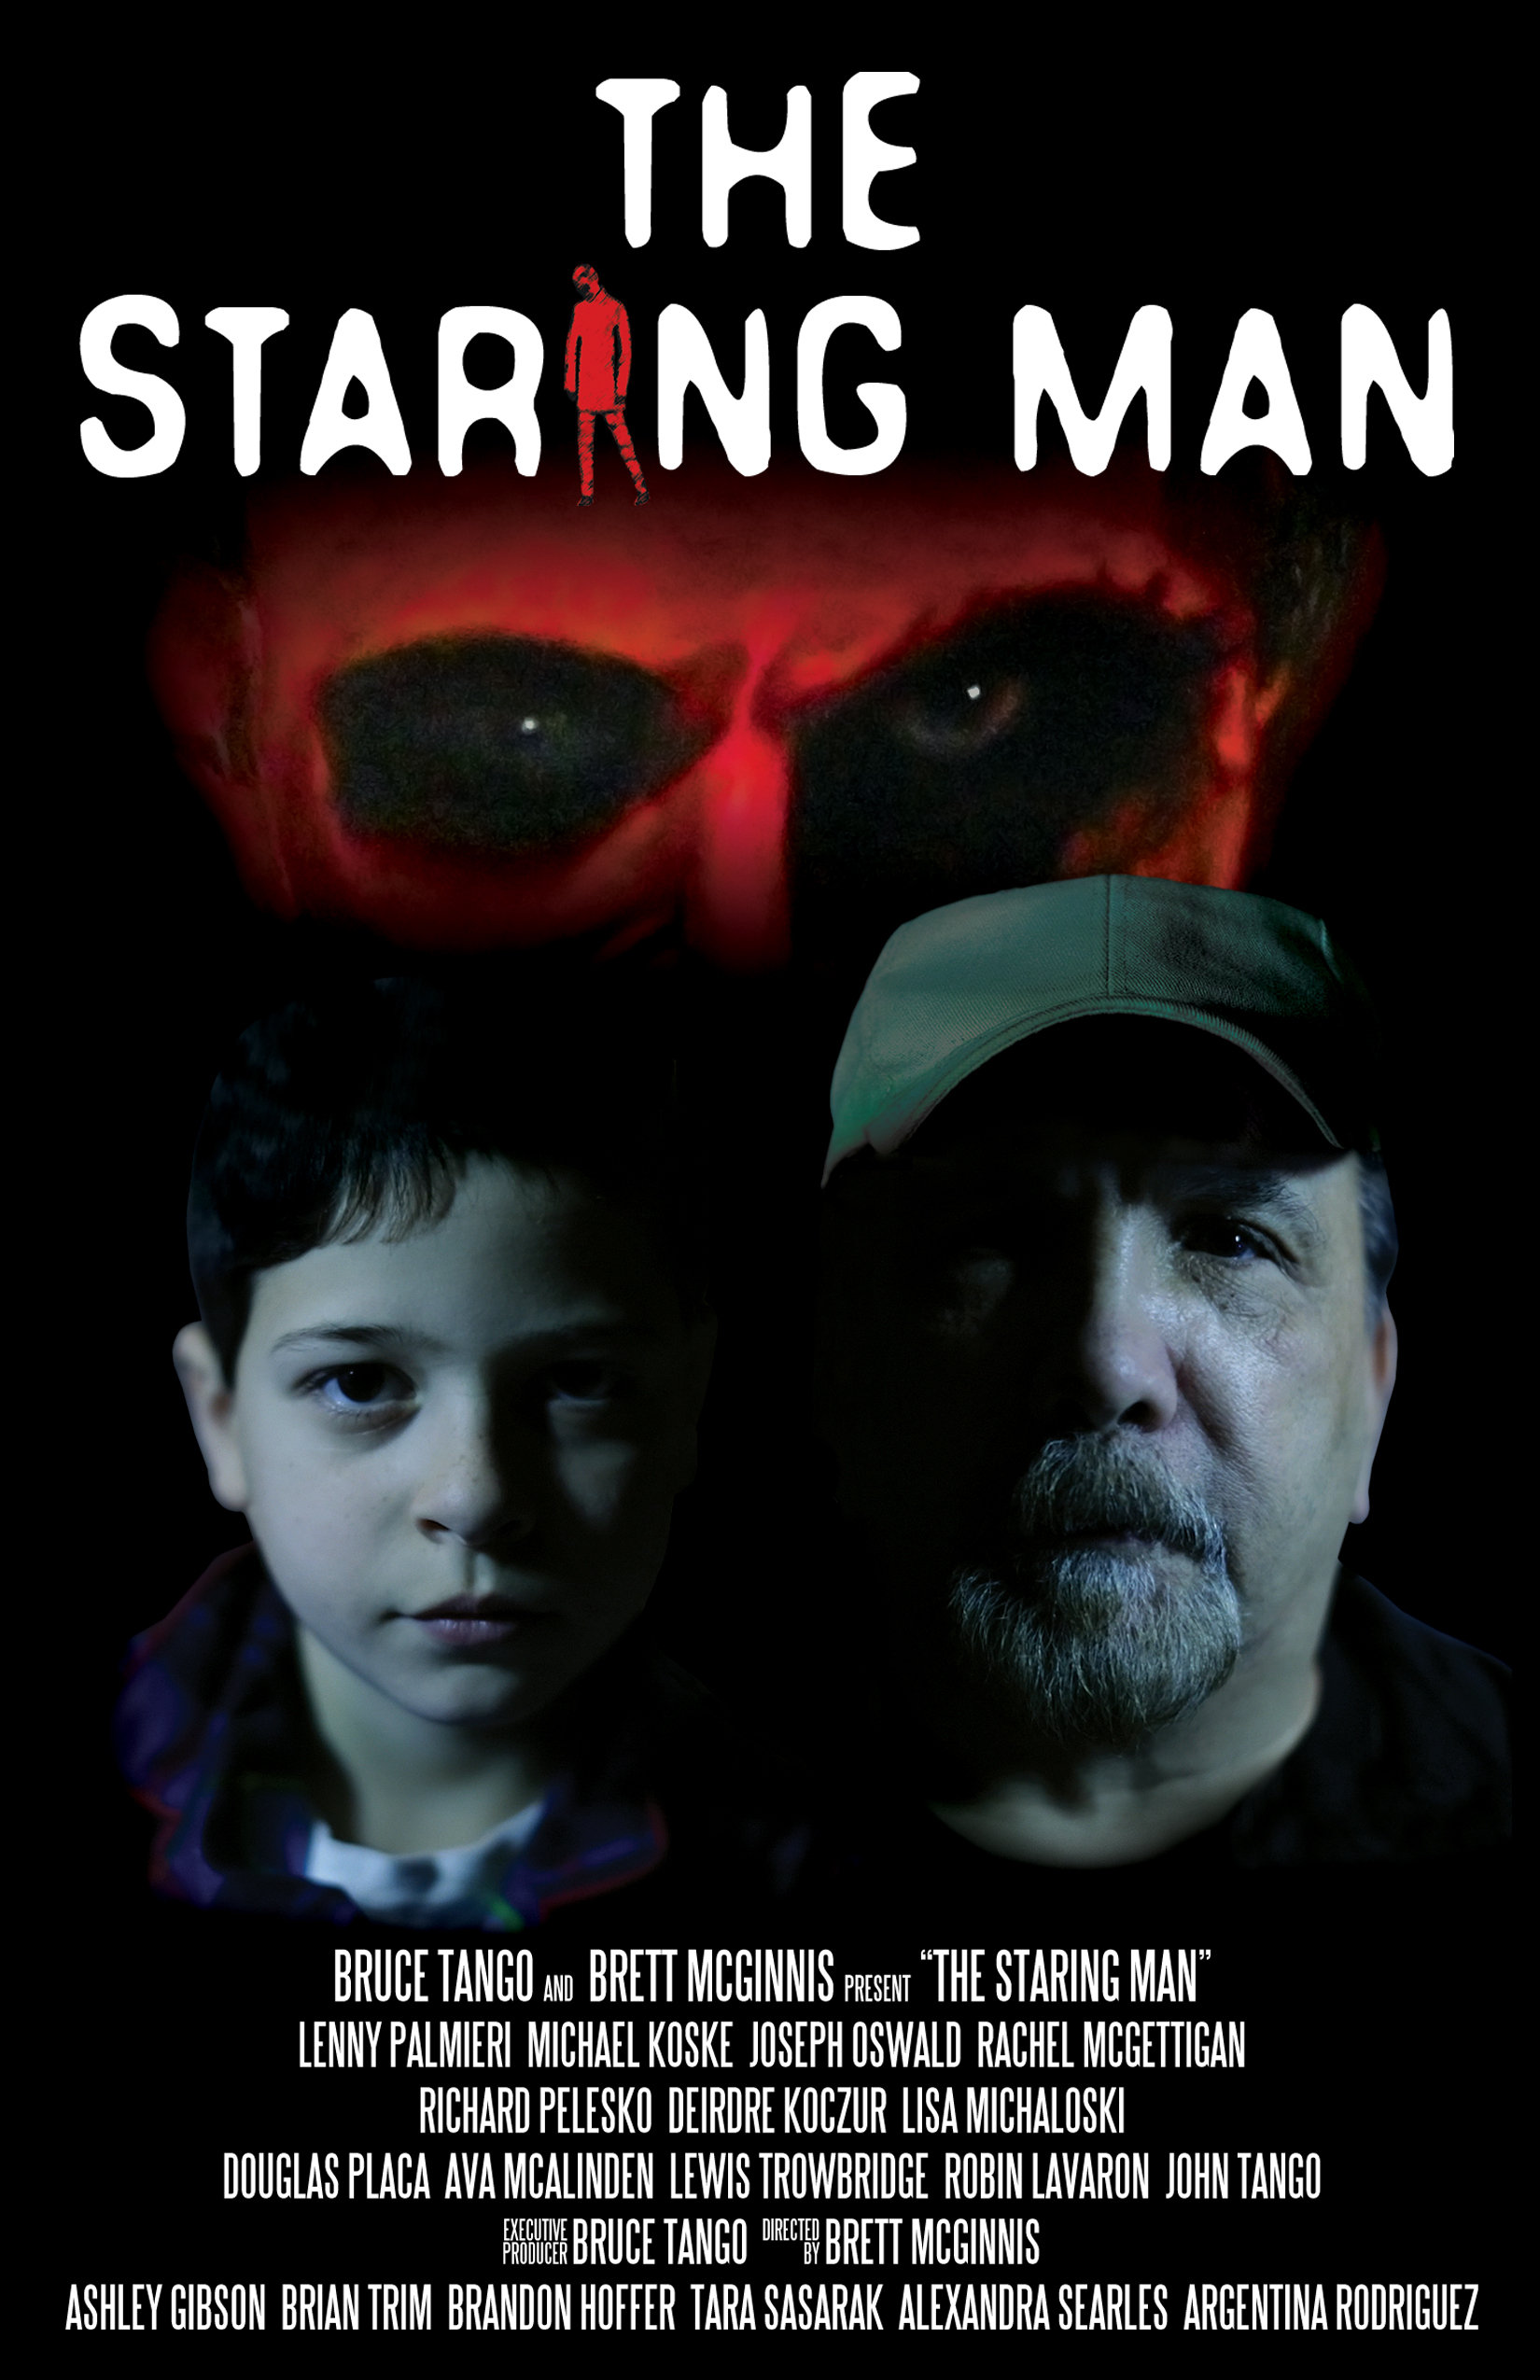 Bruce Tango and Lenny Palmieri in The Staring Man (2015)